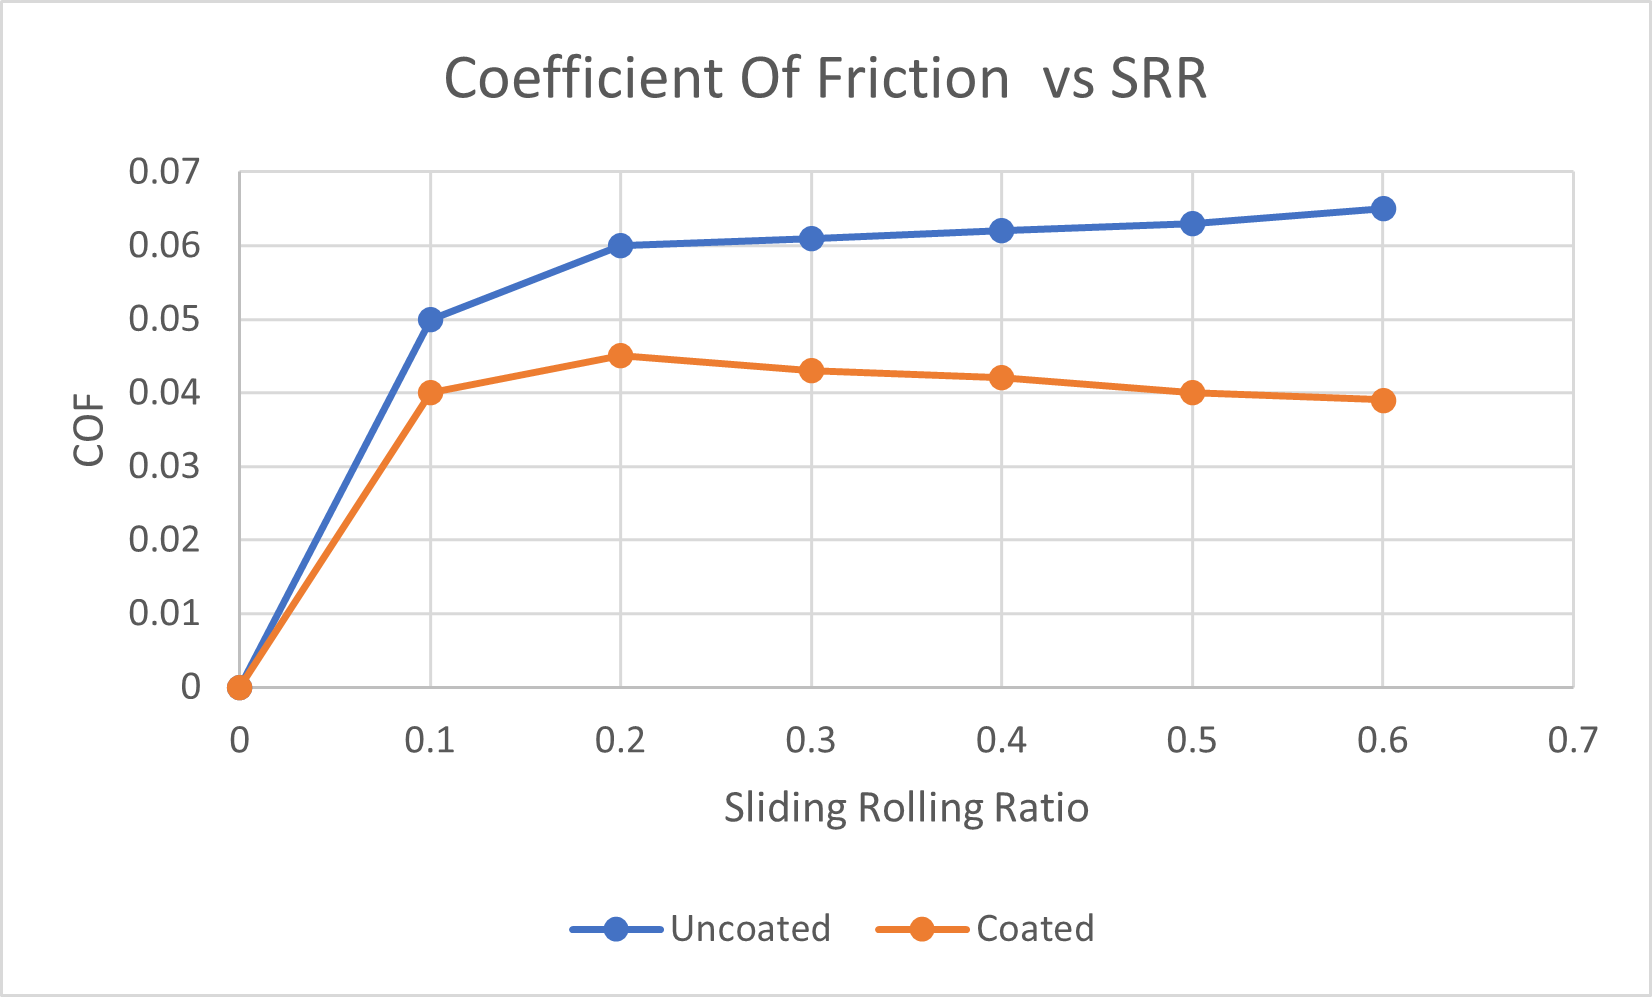 micropitting tester data of coefficient of friction vs. SRR